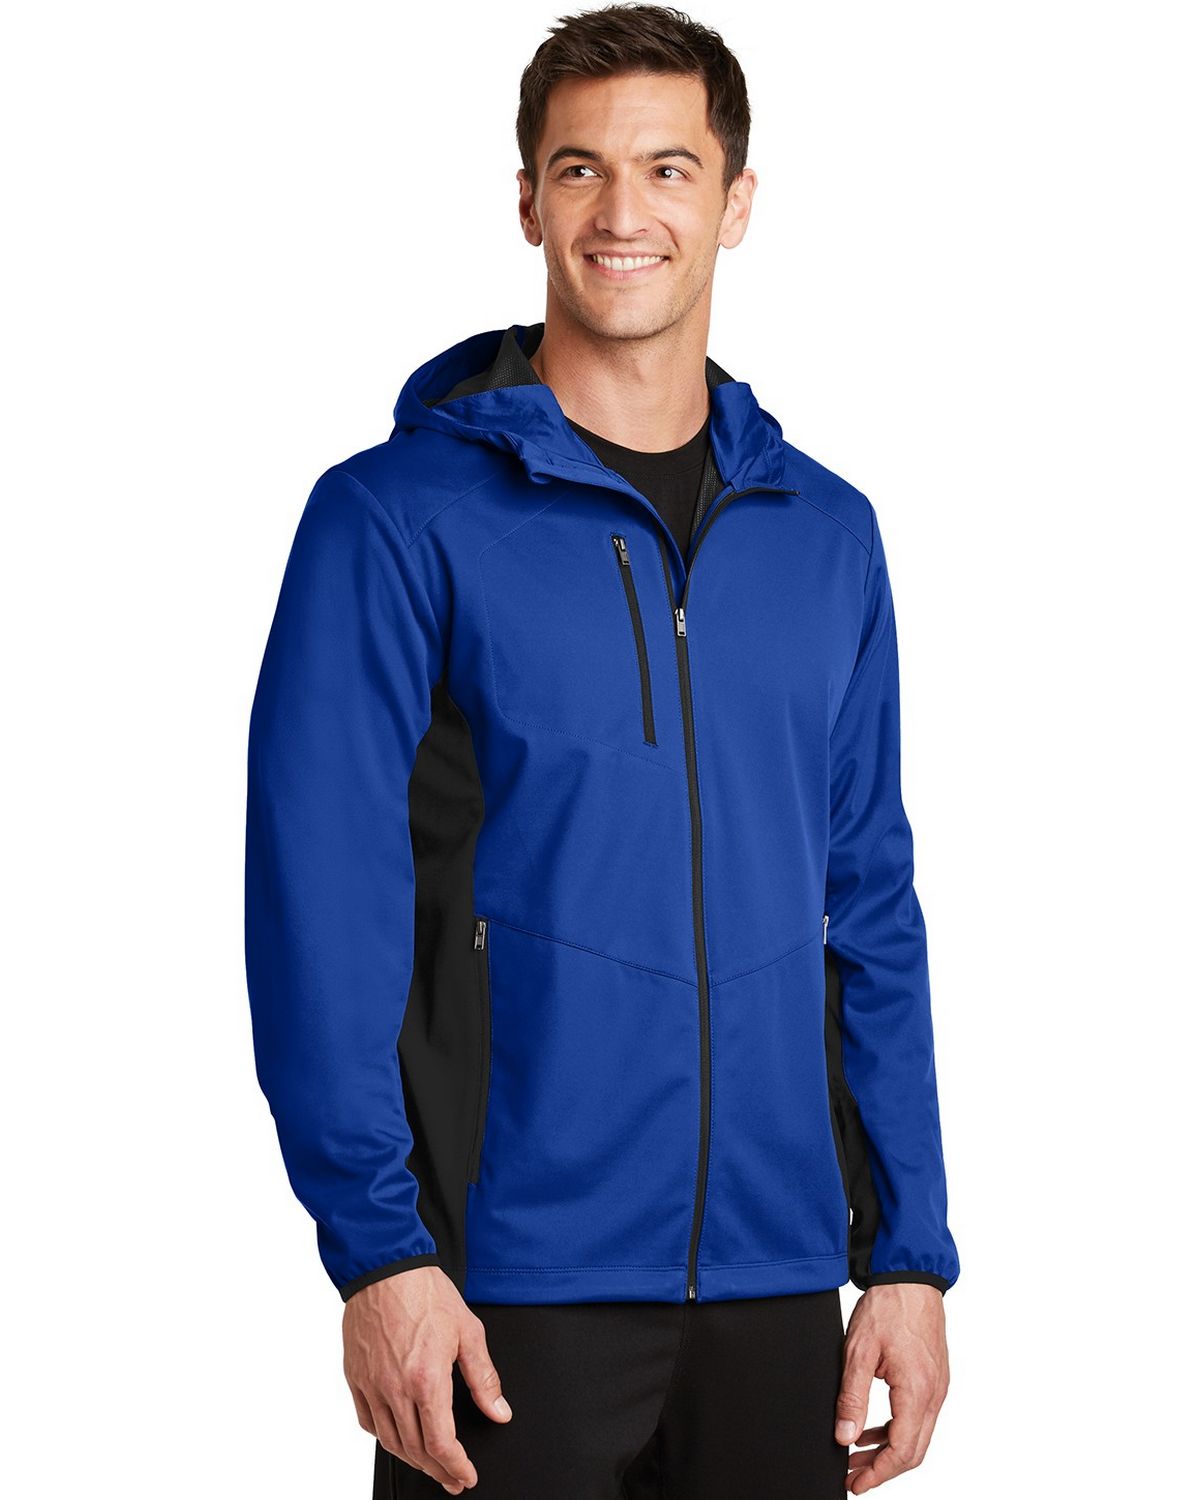 Port Authority Hooded Core Soft Shell Jacket, Product